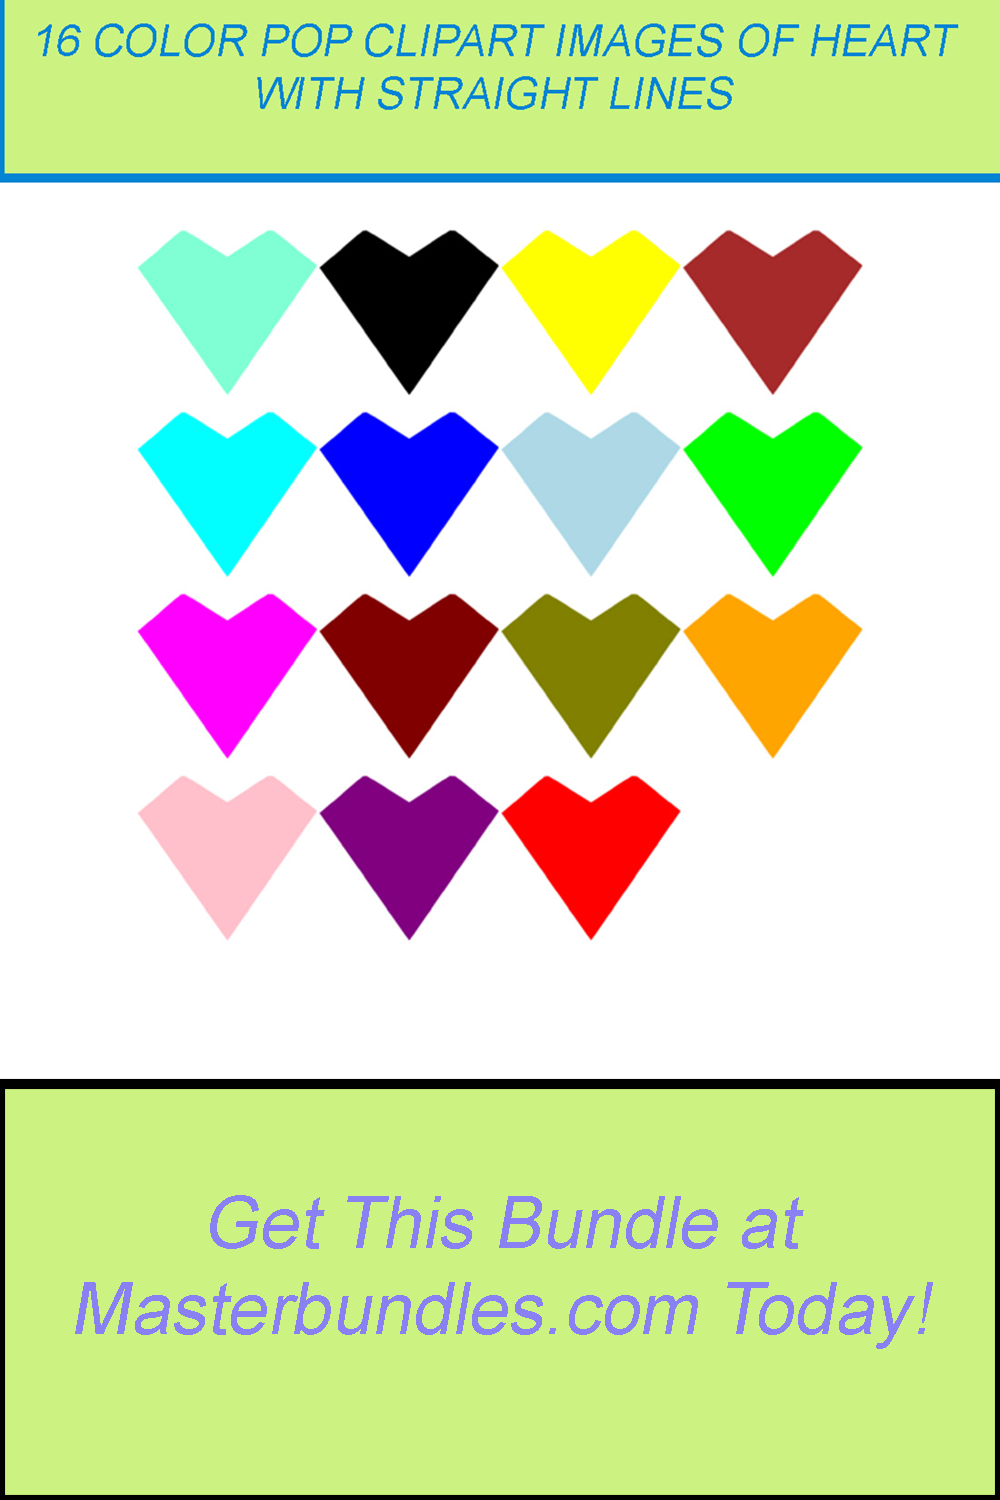 16 COLOR POP CLIPART IMAGES OF HEART STRAIGHT LINES pinterest preview image.